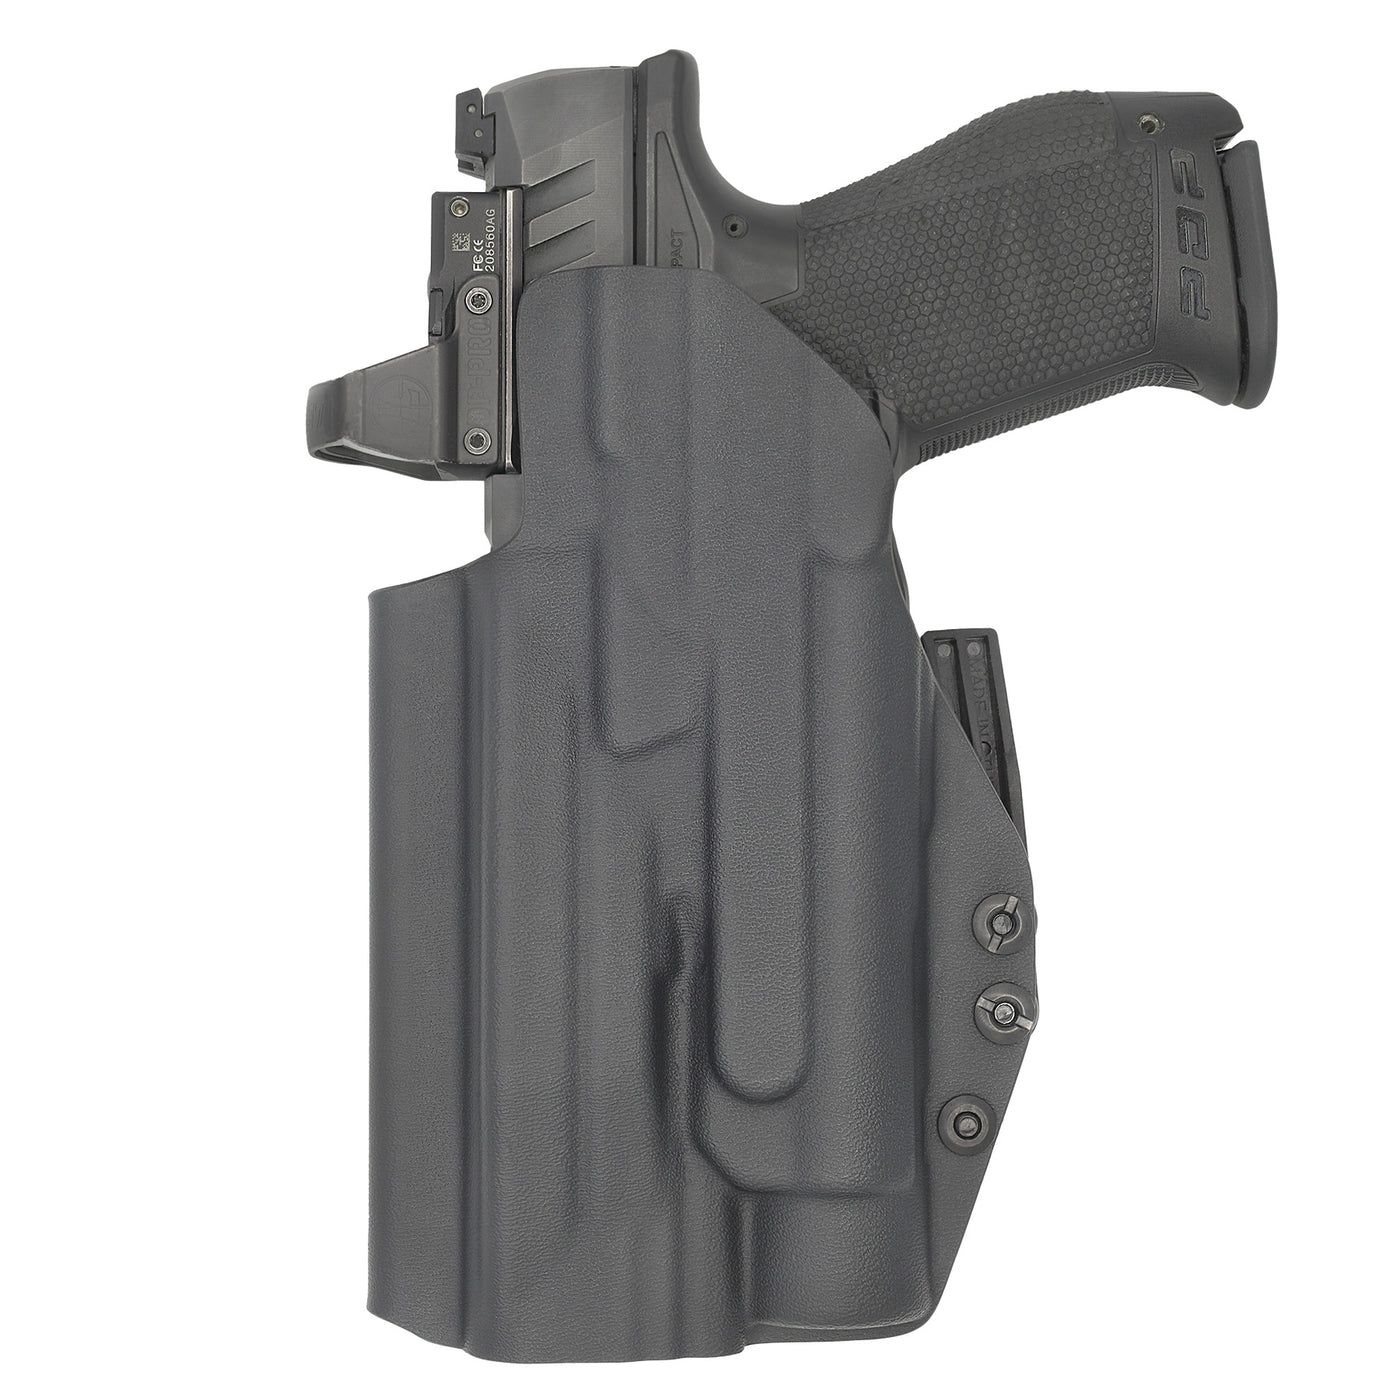 C&G Holsters quickship IWB Tactical ALPHA UPGRADE CZ Shadow 2 Streamight TLR1 in holstered position back view